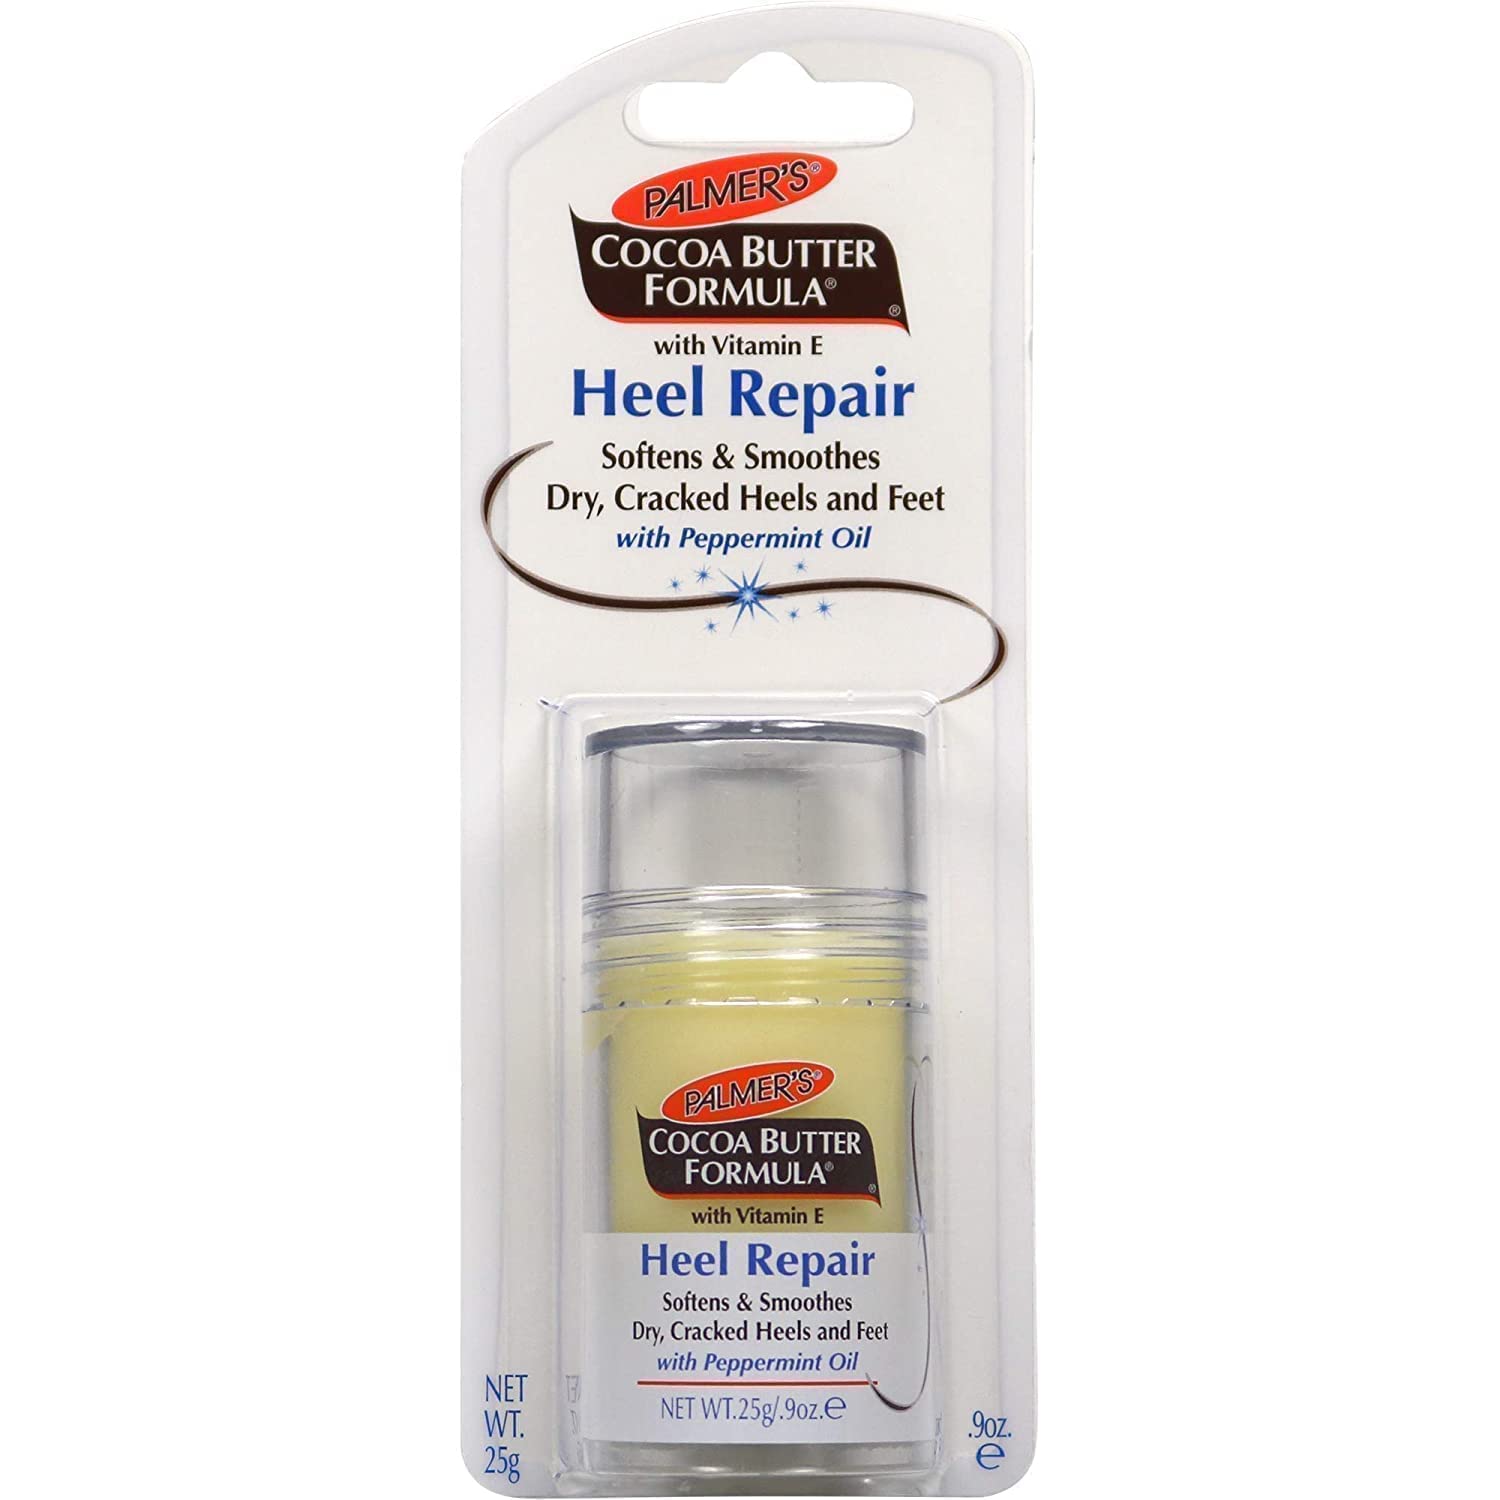 Palmer's Palmers cocoa Butter Formula Heel Repair Stick, 09 Ounce (1 Pack)